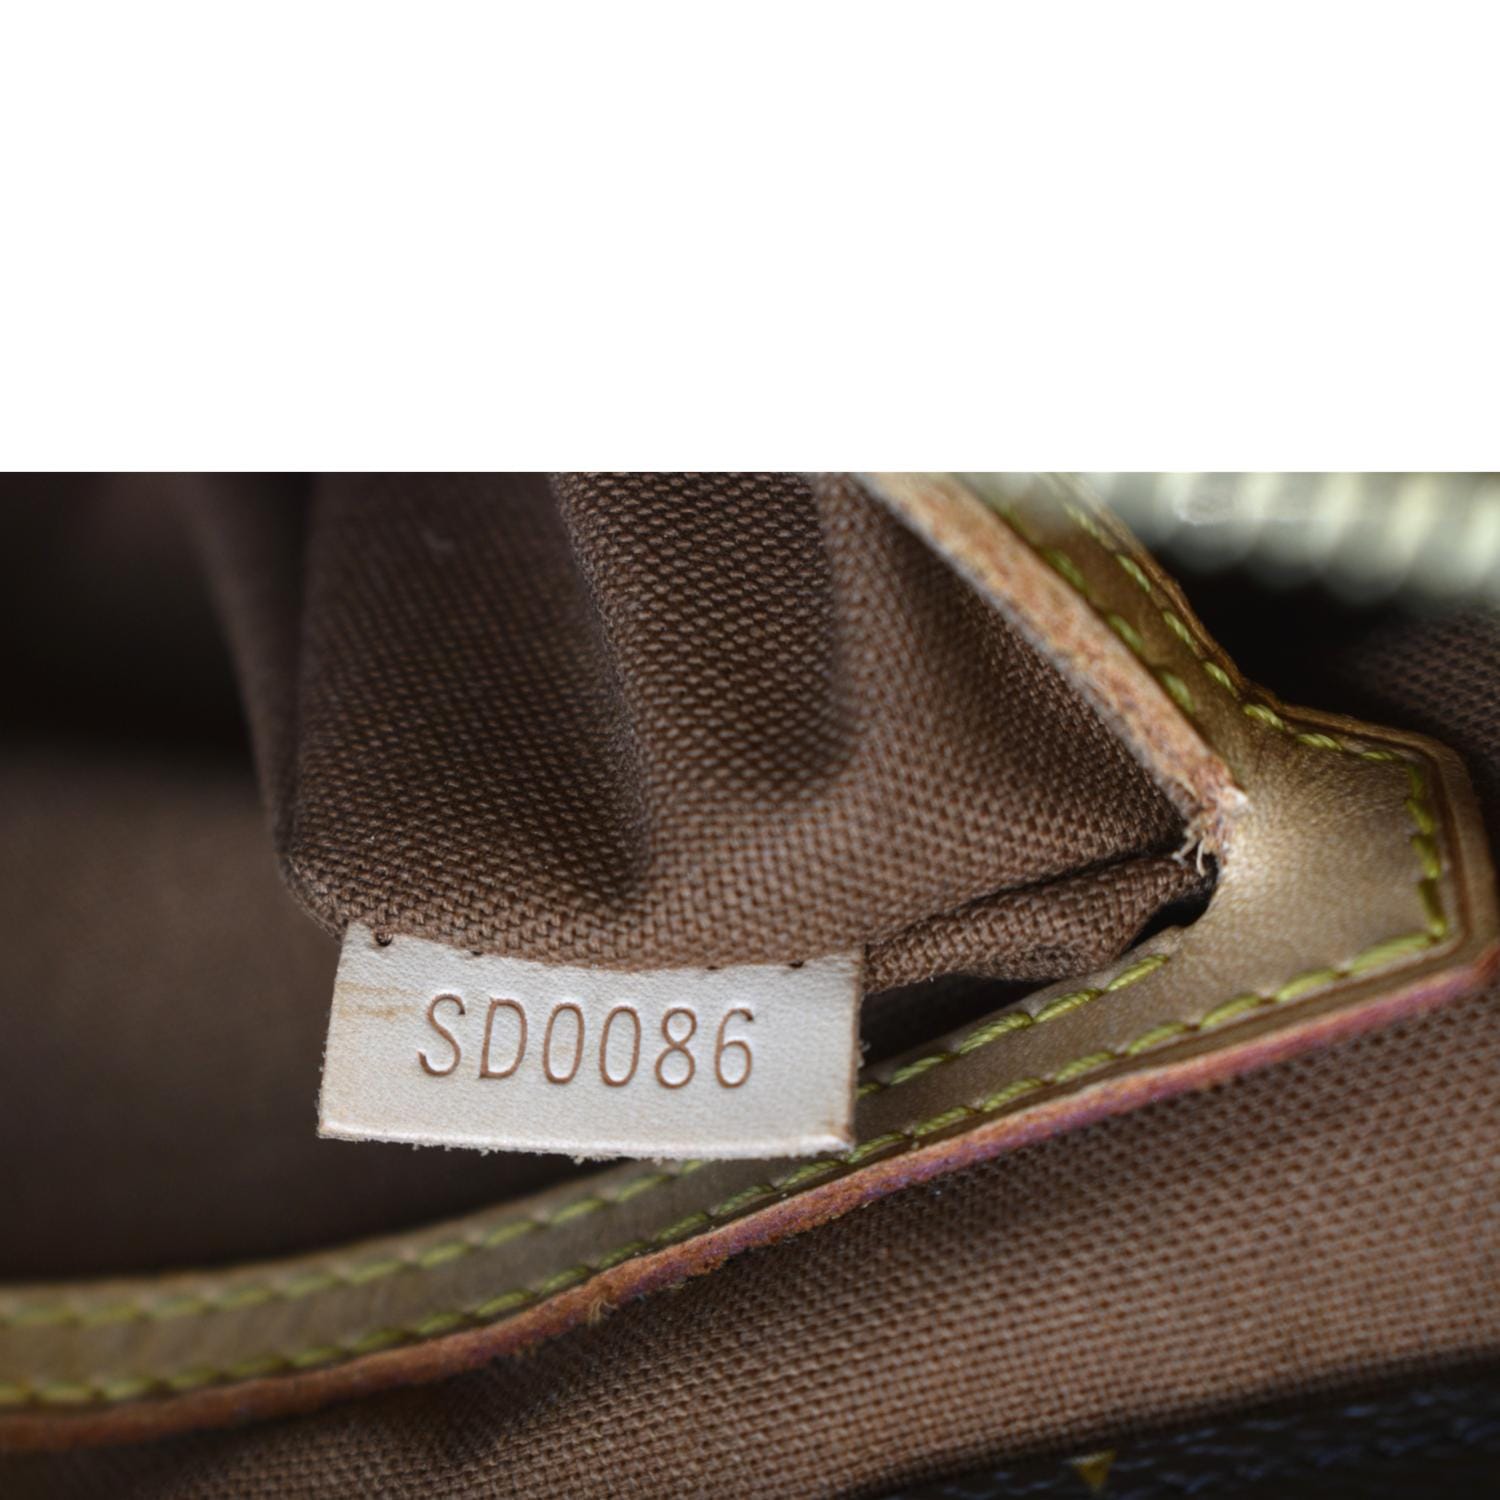 Sold at Auction: Louis Vuitton Cabas Piano Shoulder Bag, in brown monogram  coated canvas with golden brass hardware and vachetta leather handles,  ope